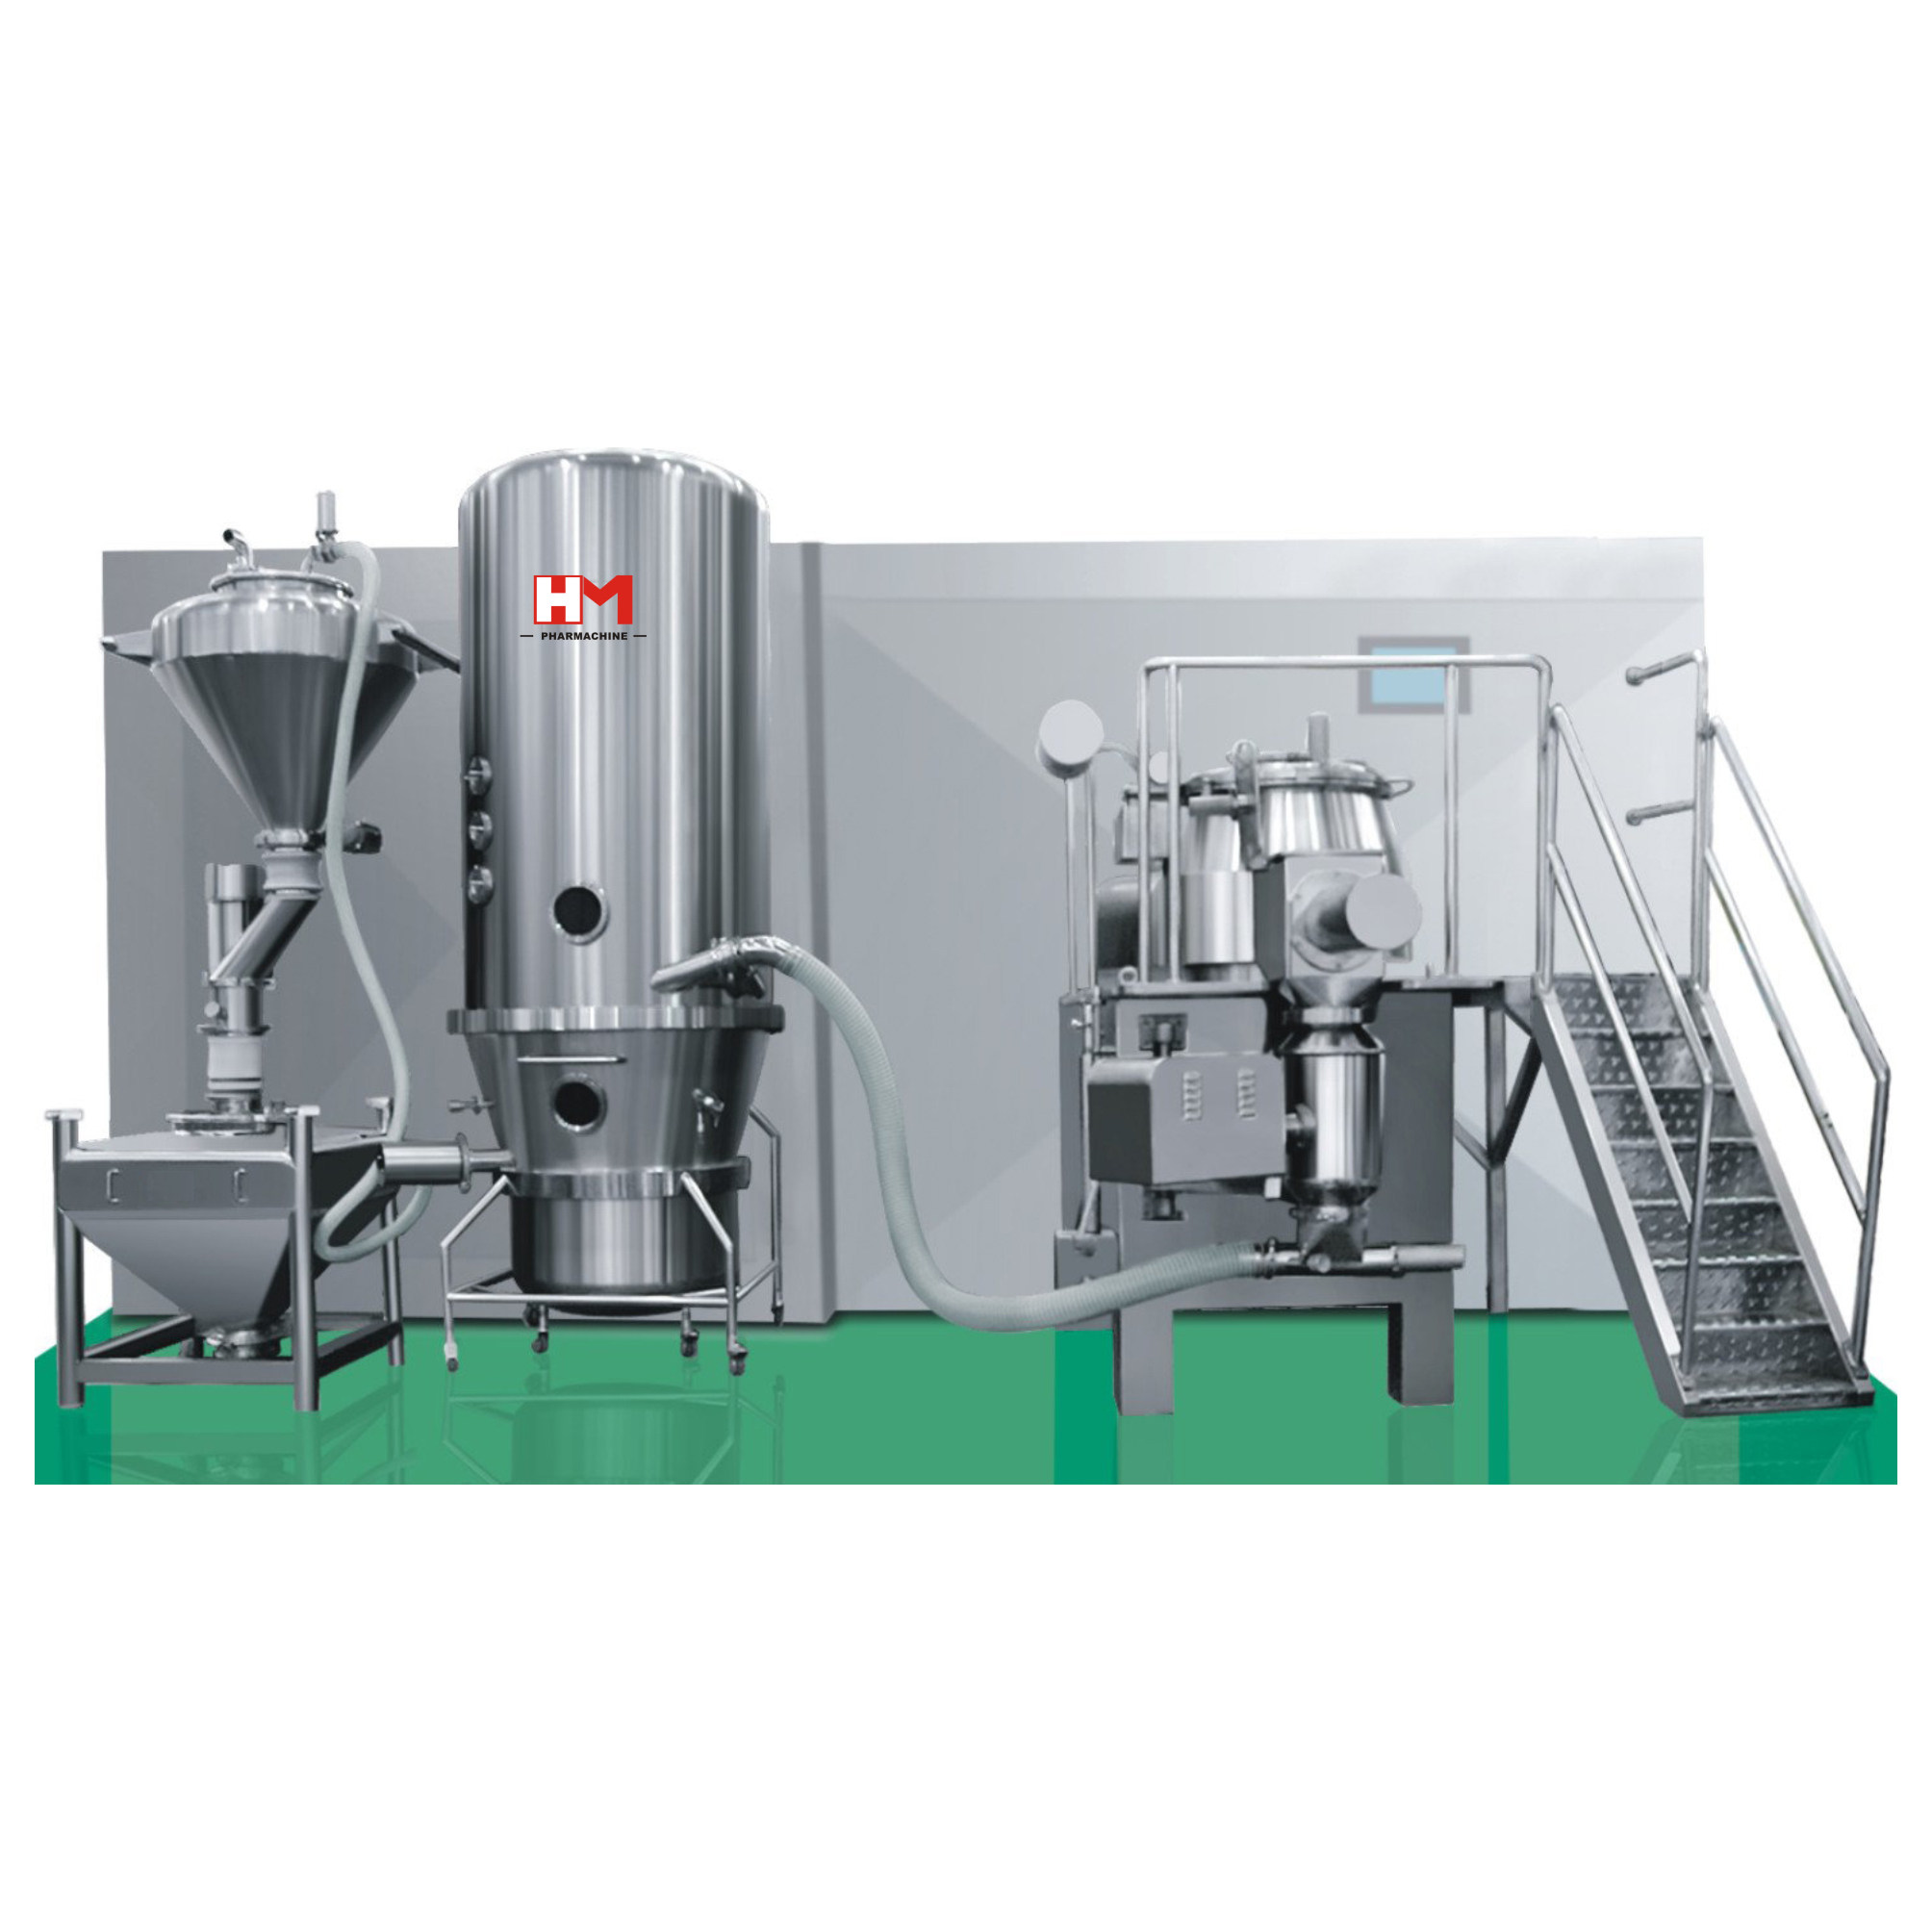 HM FBG series Fluid Bed Dried and Granulator